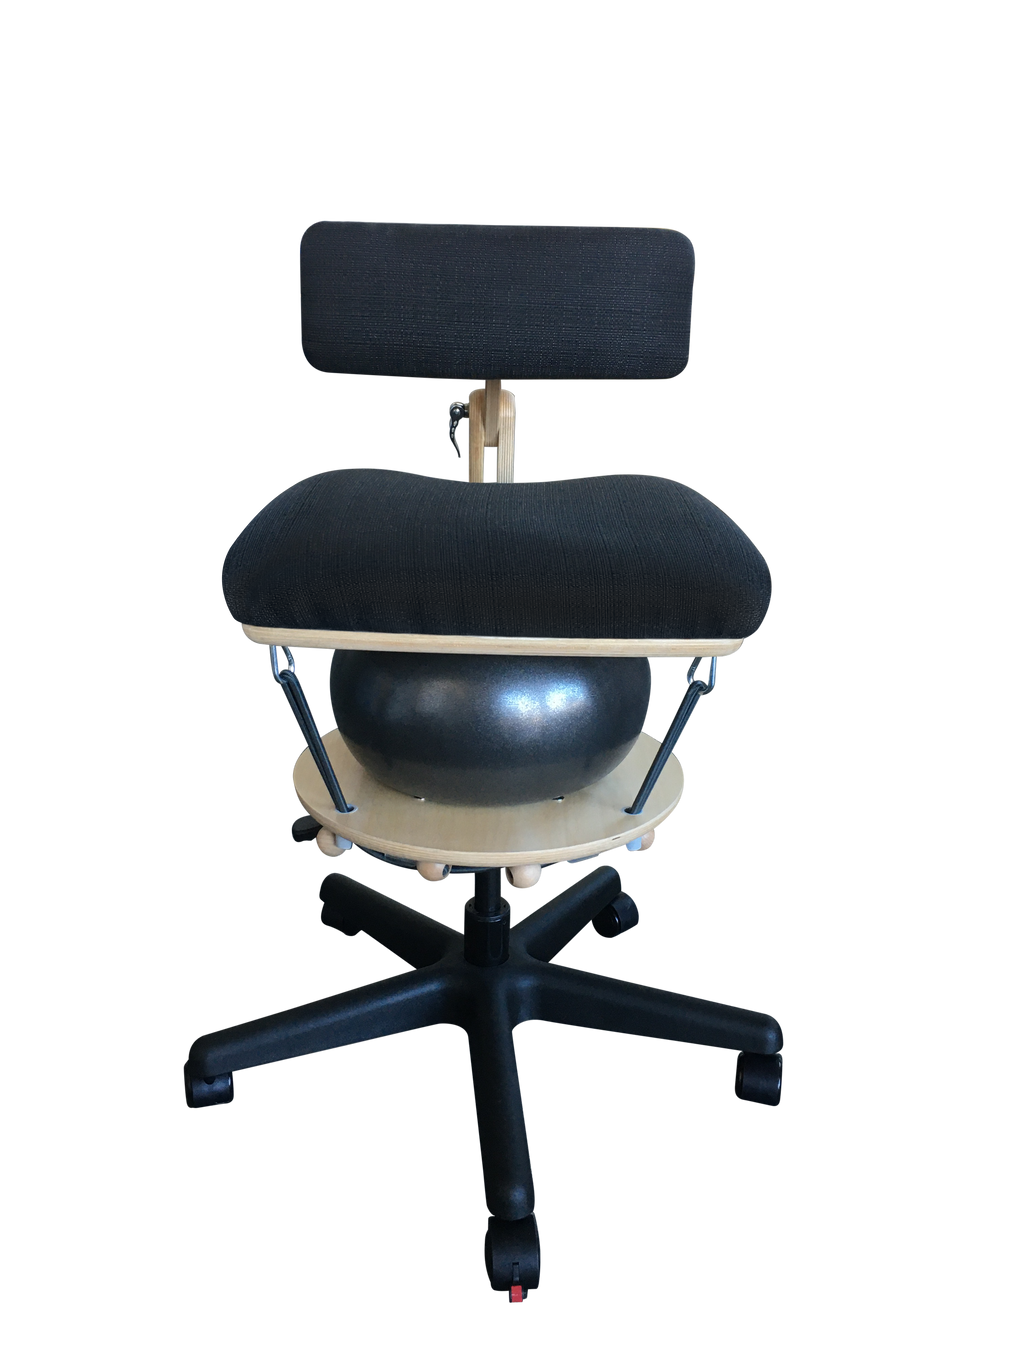 Språng Chair 2.0 - Our Most Popular Option